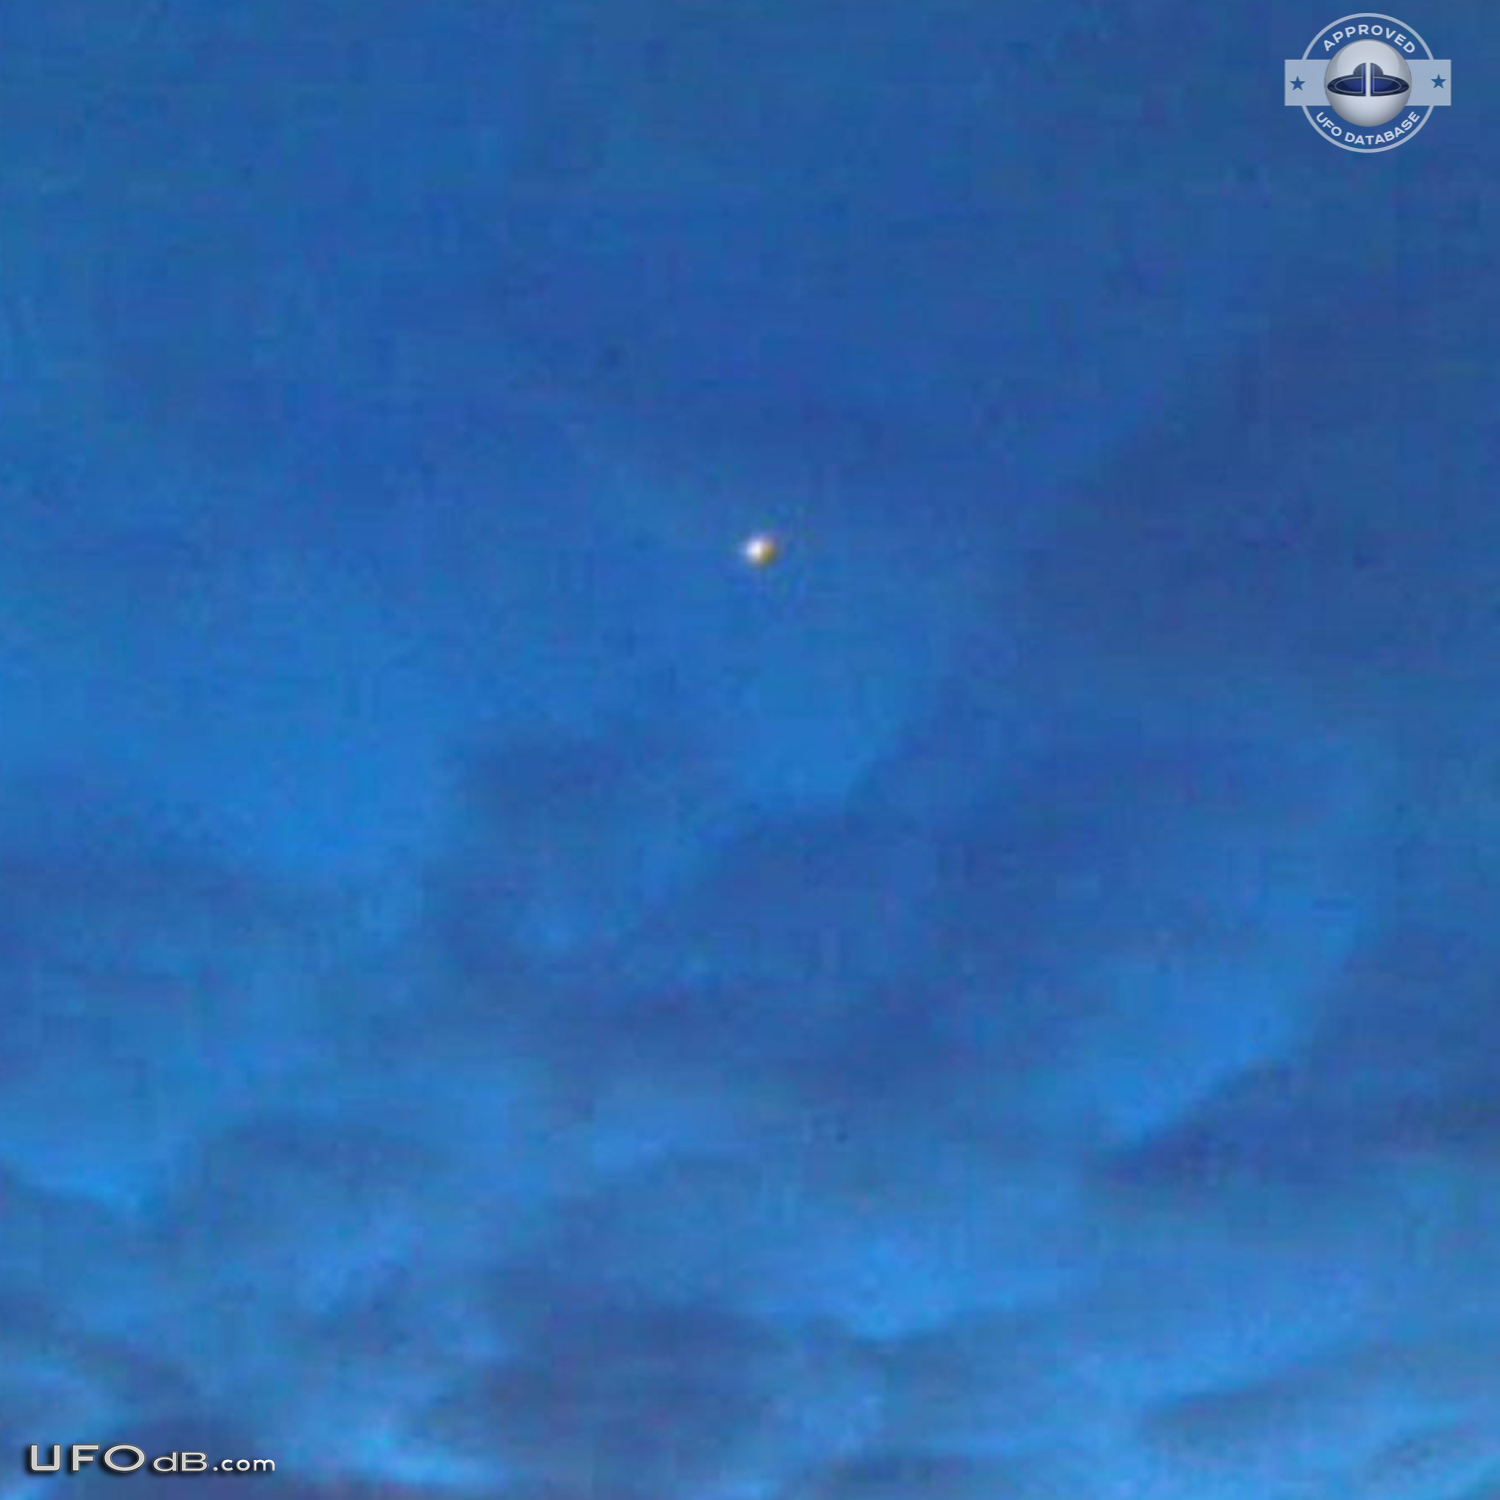 Fleet of 7 ufos changing color caught on photo over Riga, Latvia 2010 UFO Picture #405-3